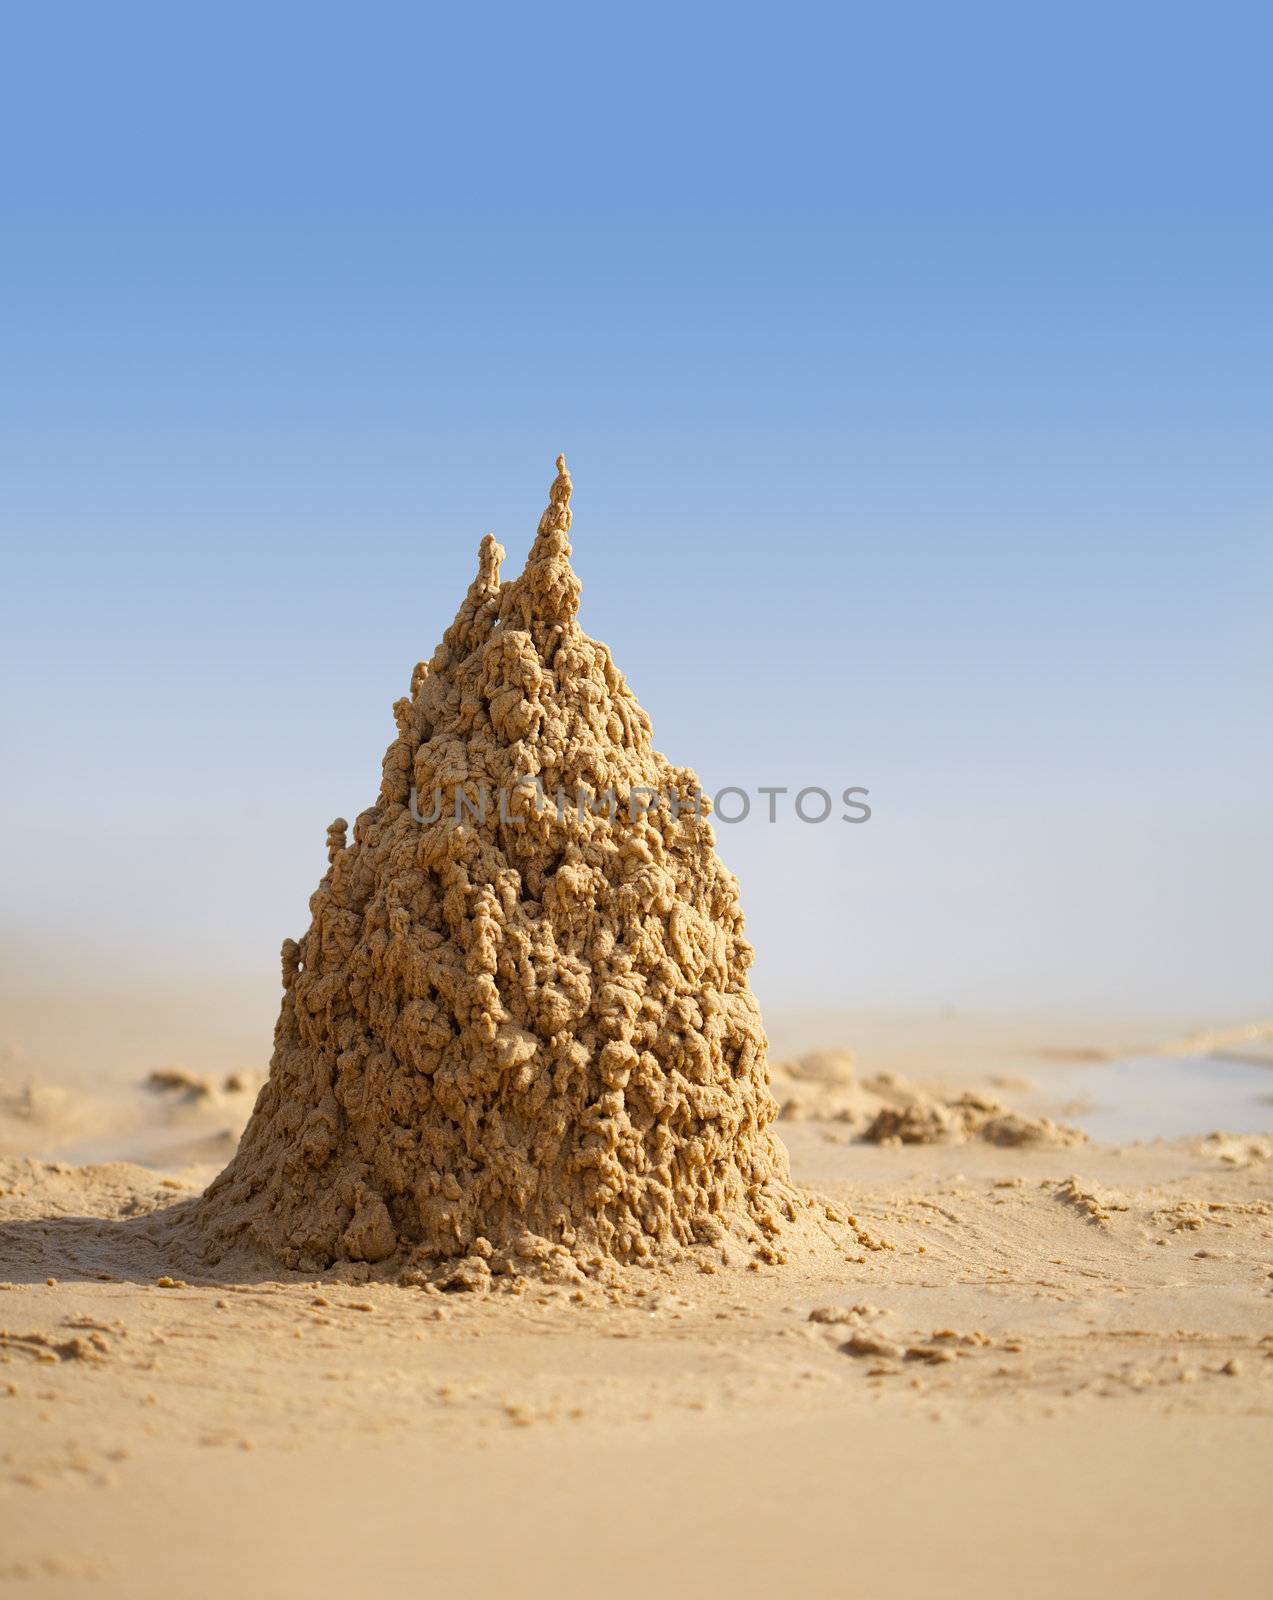 Surreal sand castle on beach by pzaxe